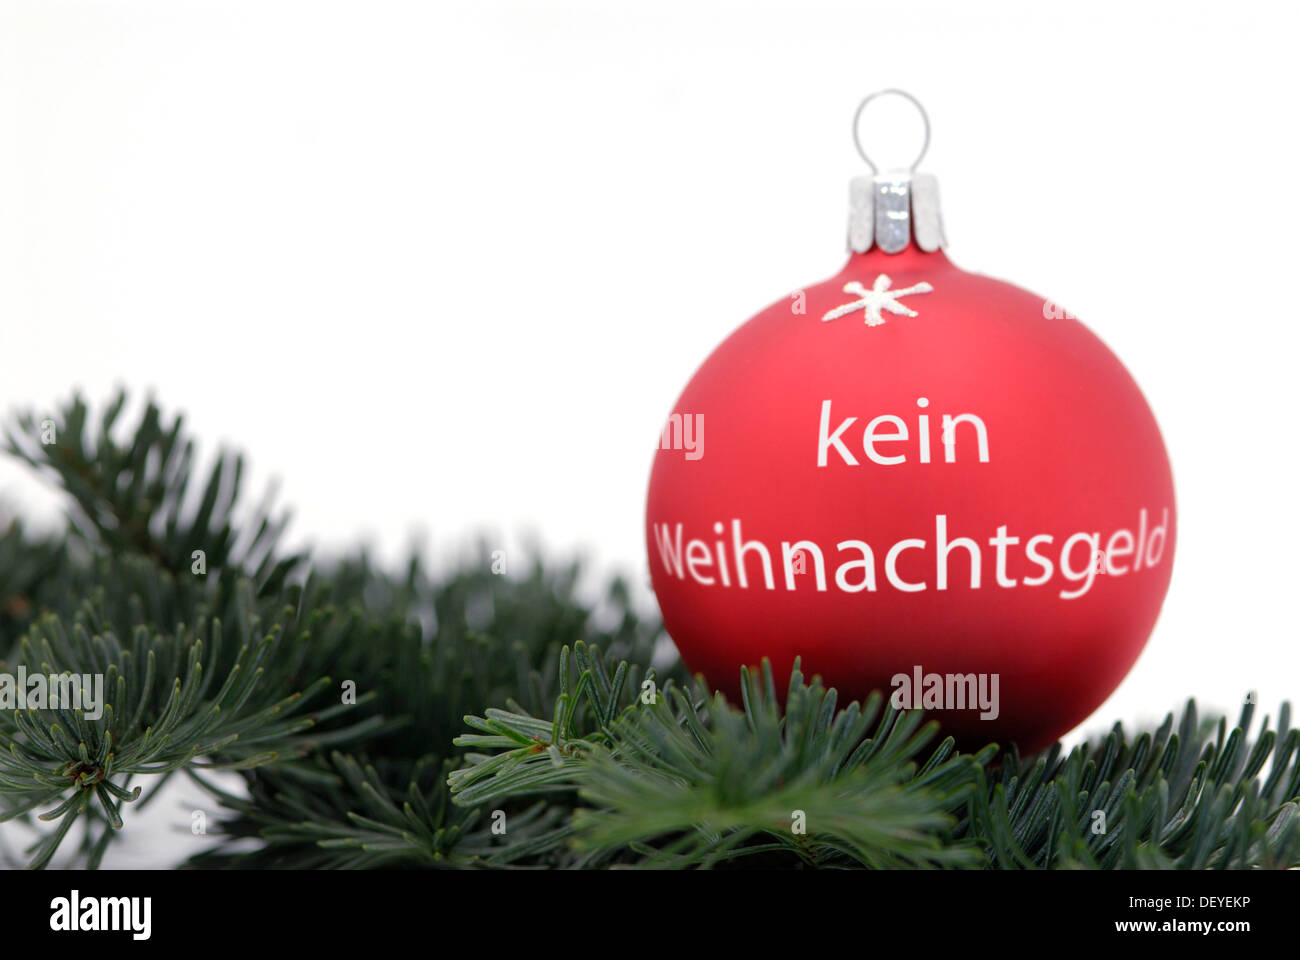 Christmas ball with the inscription "kein Weihnachtsgeld", German for "no Christmas bonus", financial crisis Stock Photo